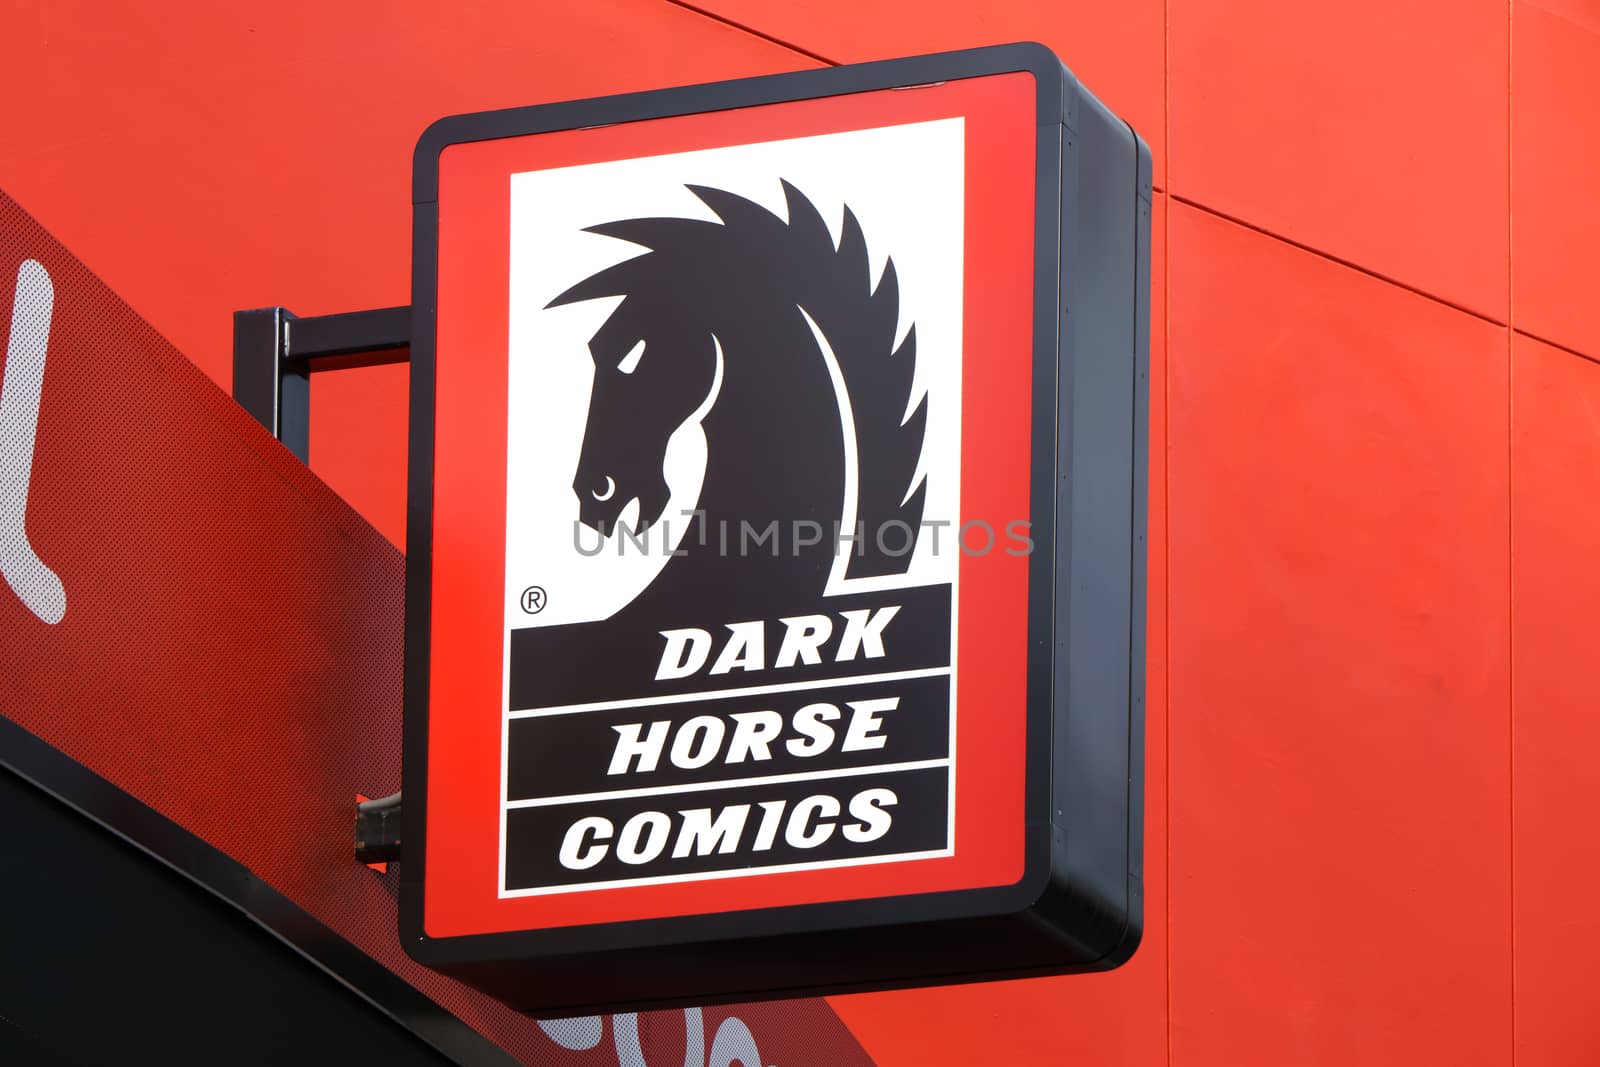 UNIVERSAL CITY, CA/USA DECEMBER 22, 2015: Dark Horse Comics retail store and sign. Dark Horse Comics is an American comic book and manga publisher.